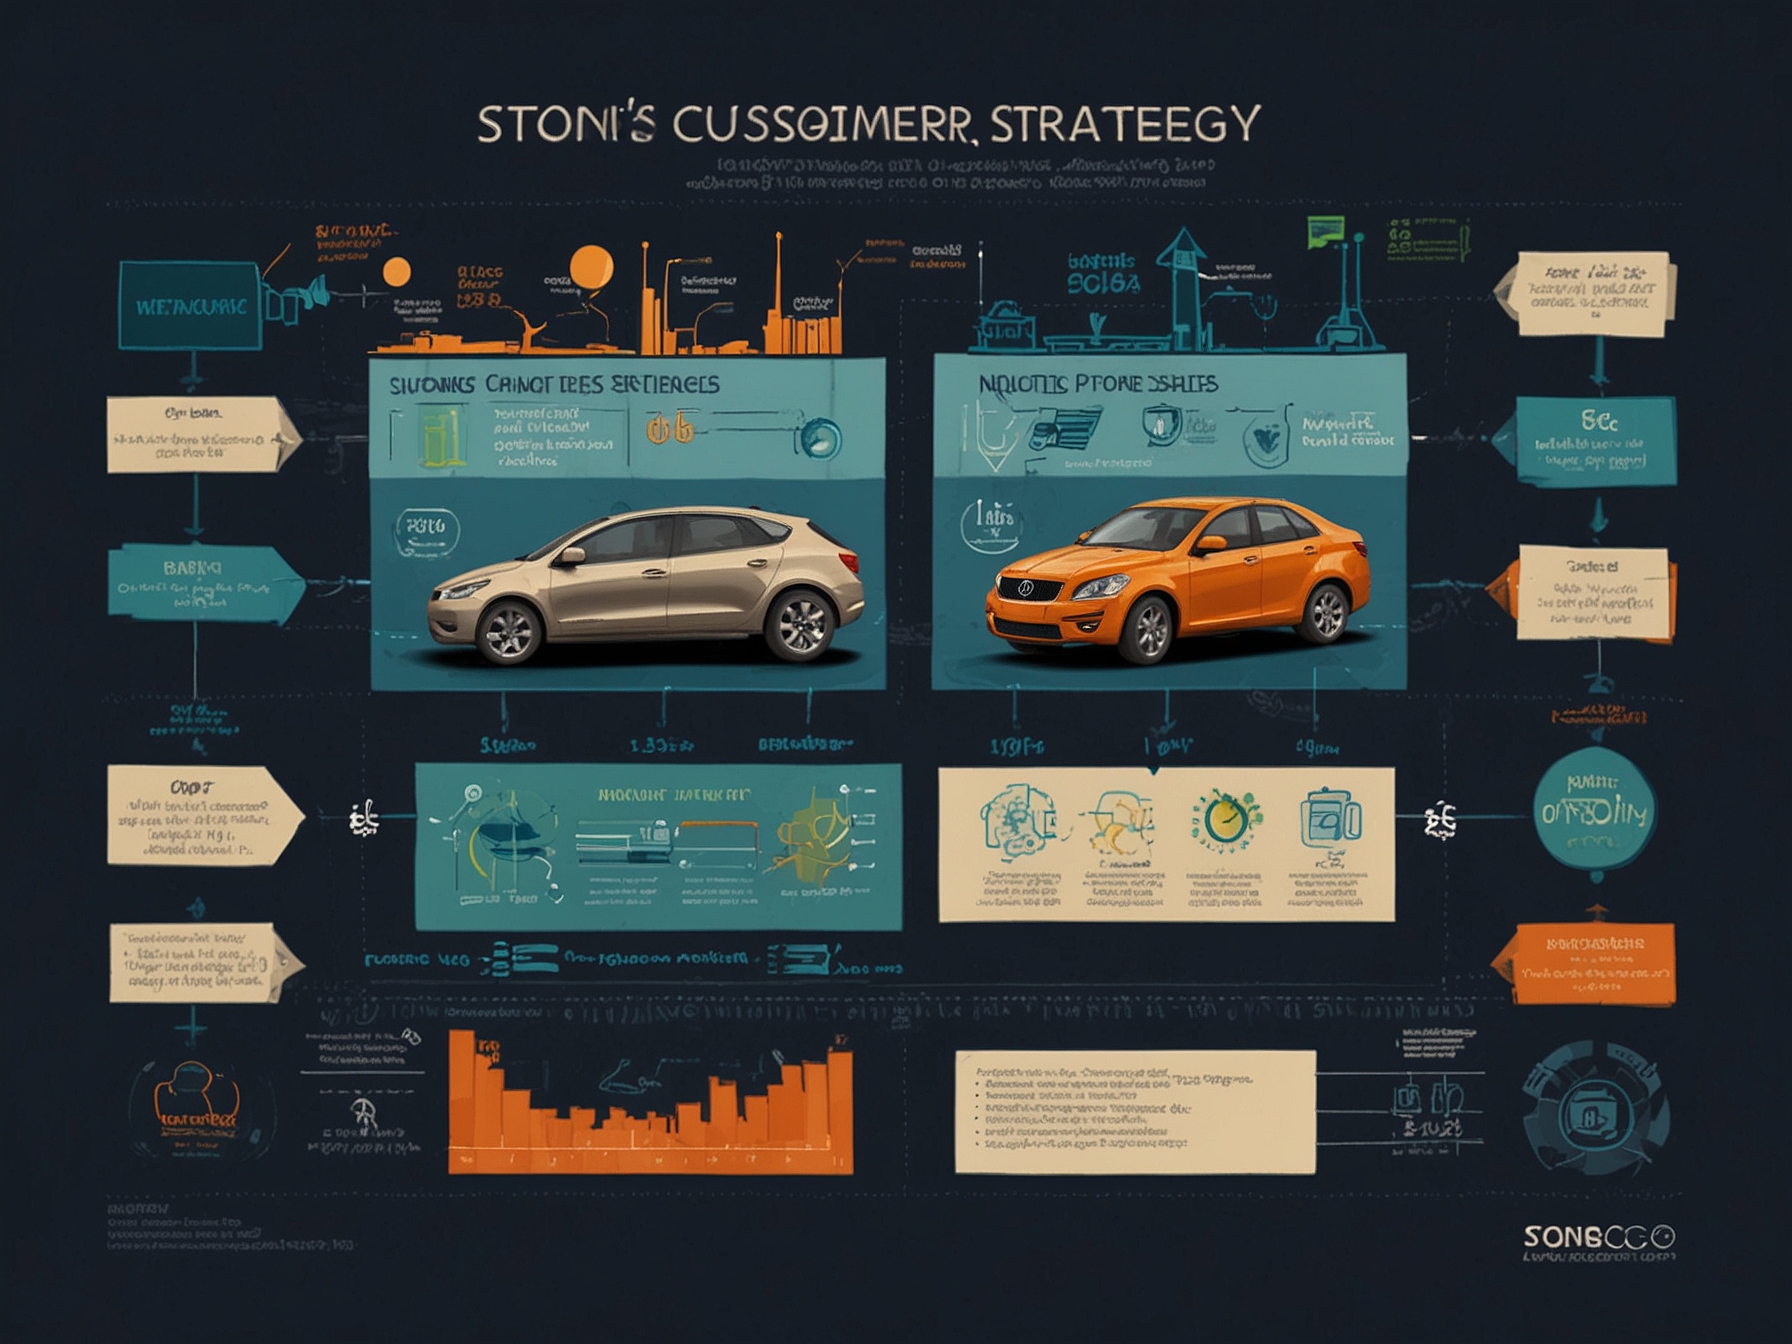 An infographic illustrating StoneCo's customer acquisition strategy, showing both direct sales efforts and strategic partnerships contributing to its rapid customer base growth.